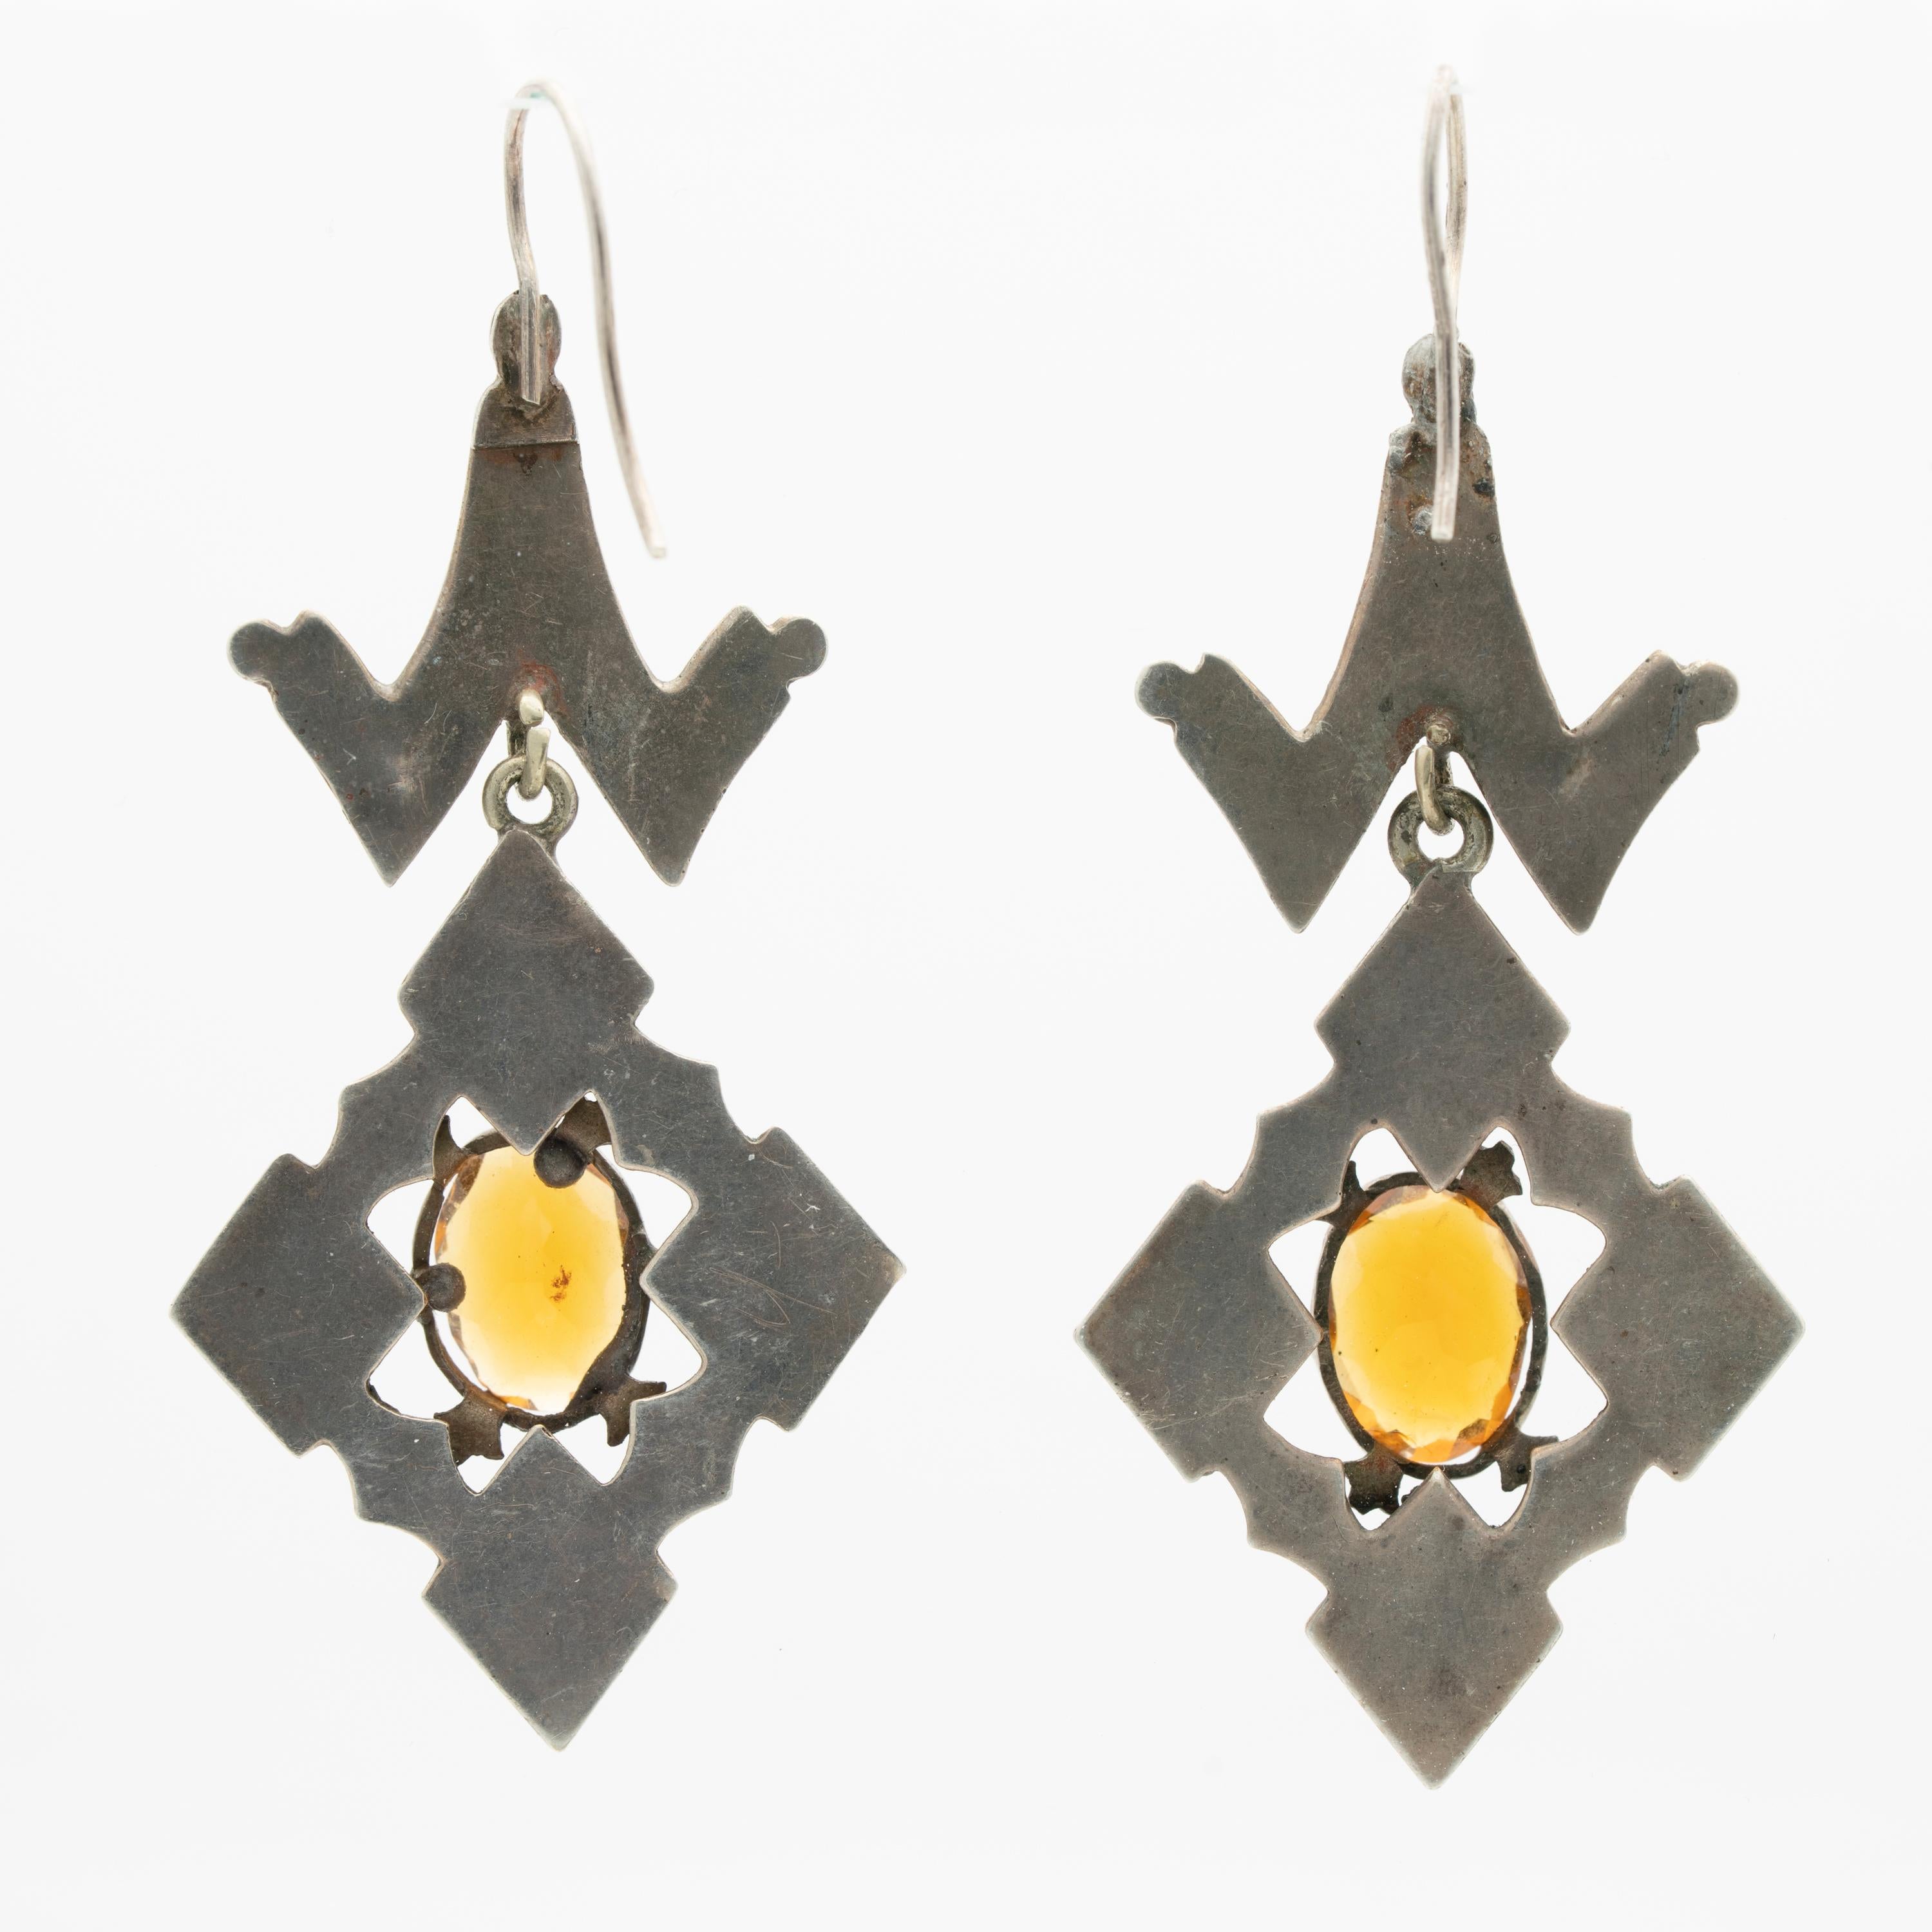 Oval Cut Scottish Silver and Agate and Citrine Drop Earrings